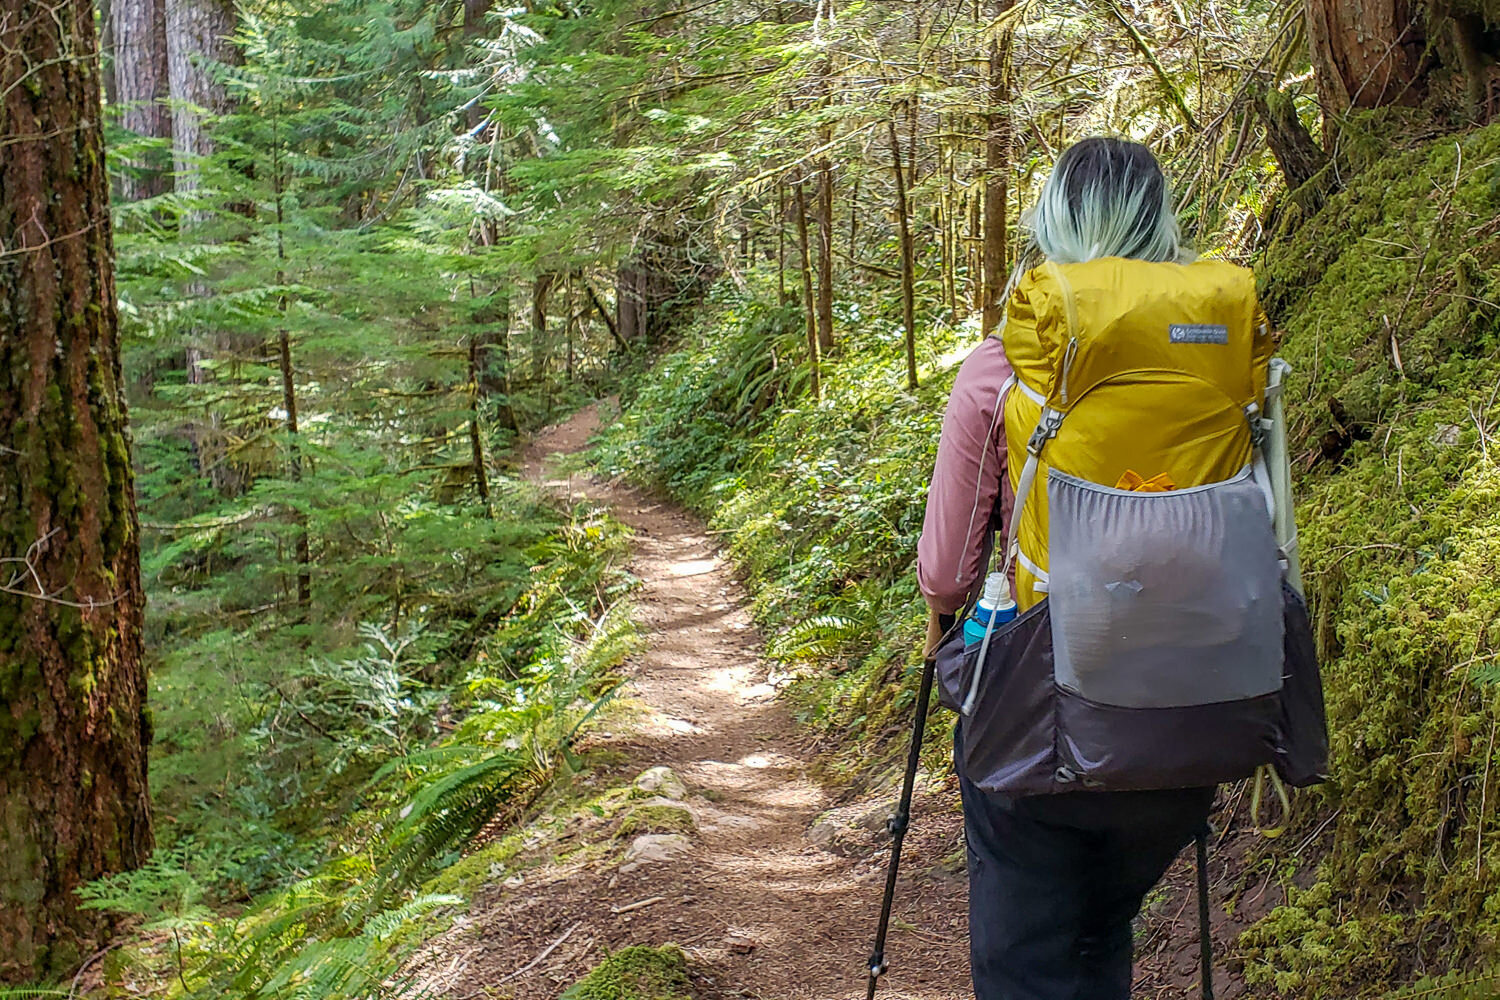 The Gossamer Gear Gorilla 50 is comfortable, lightweight, & has the perfect capacity for fast & light trips.